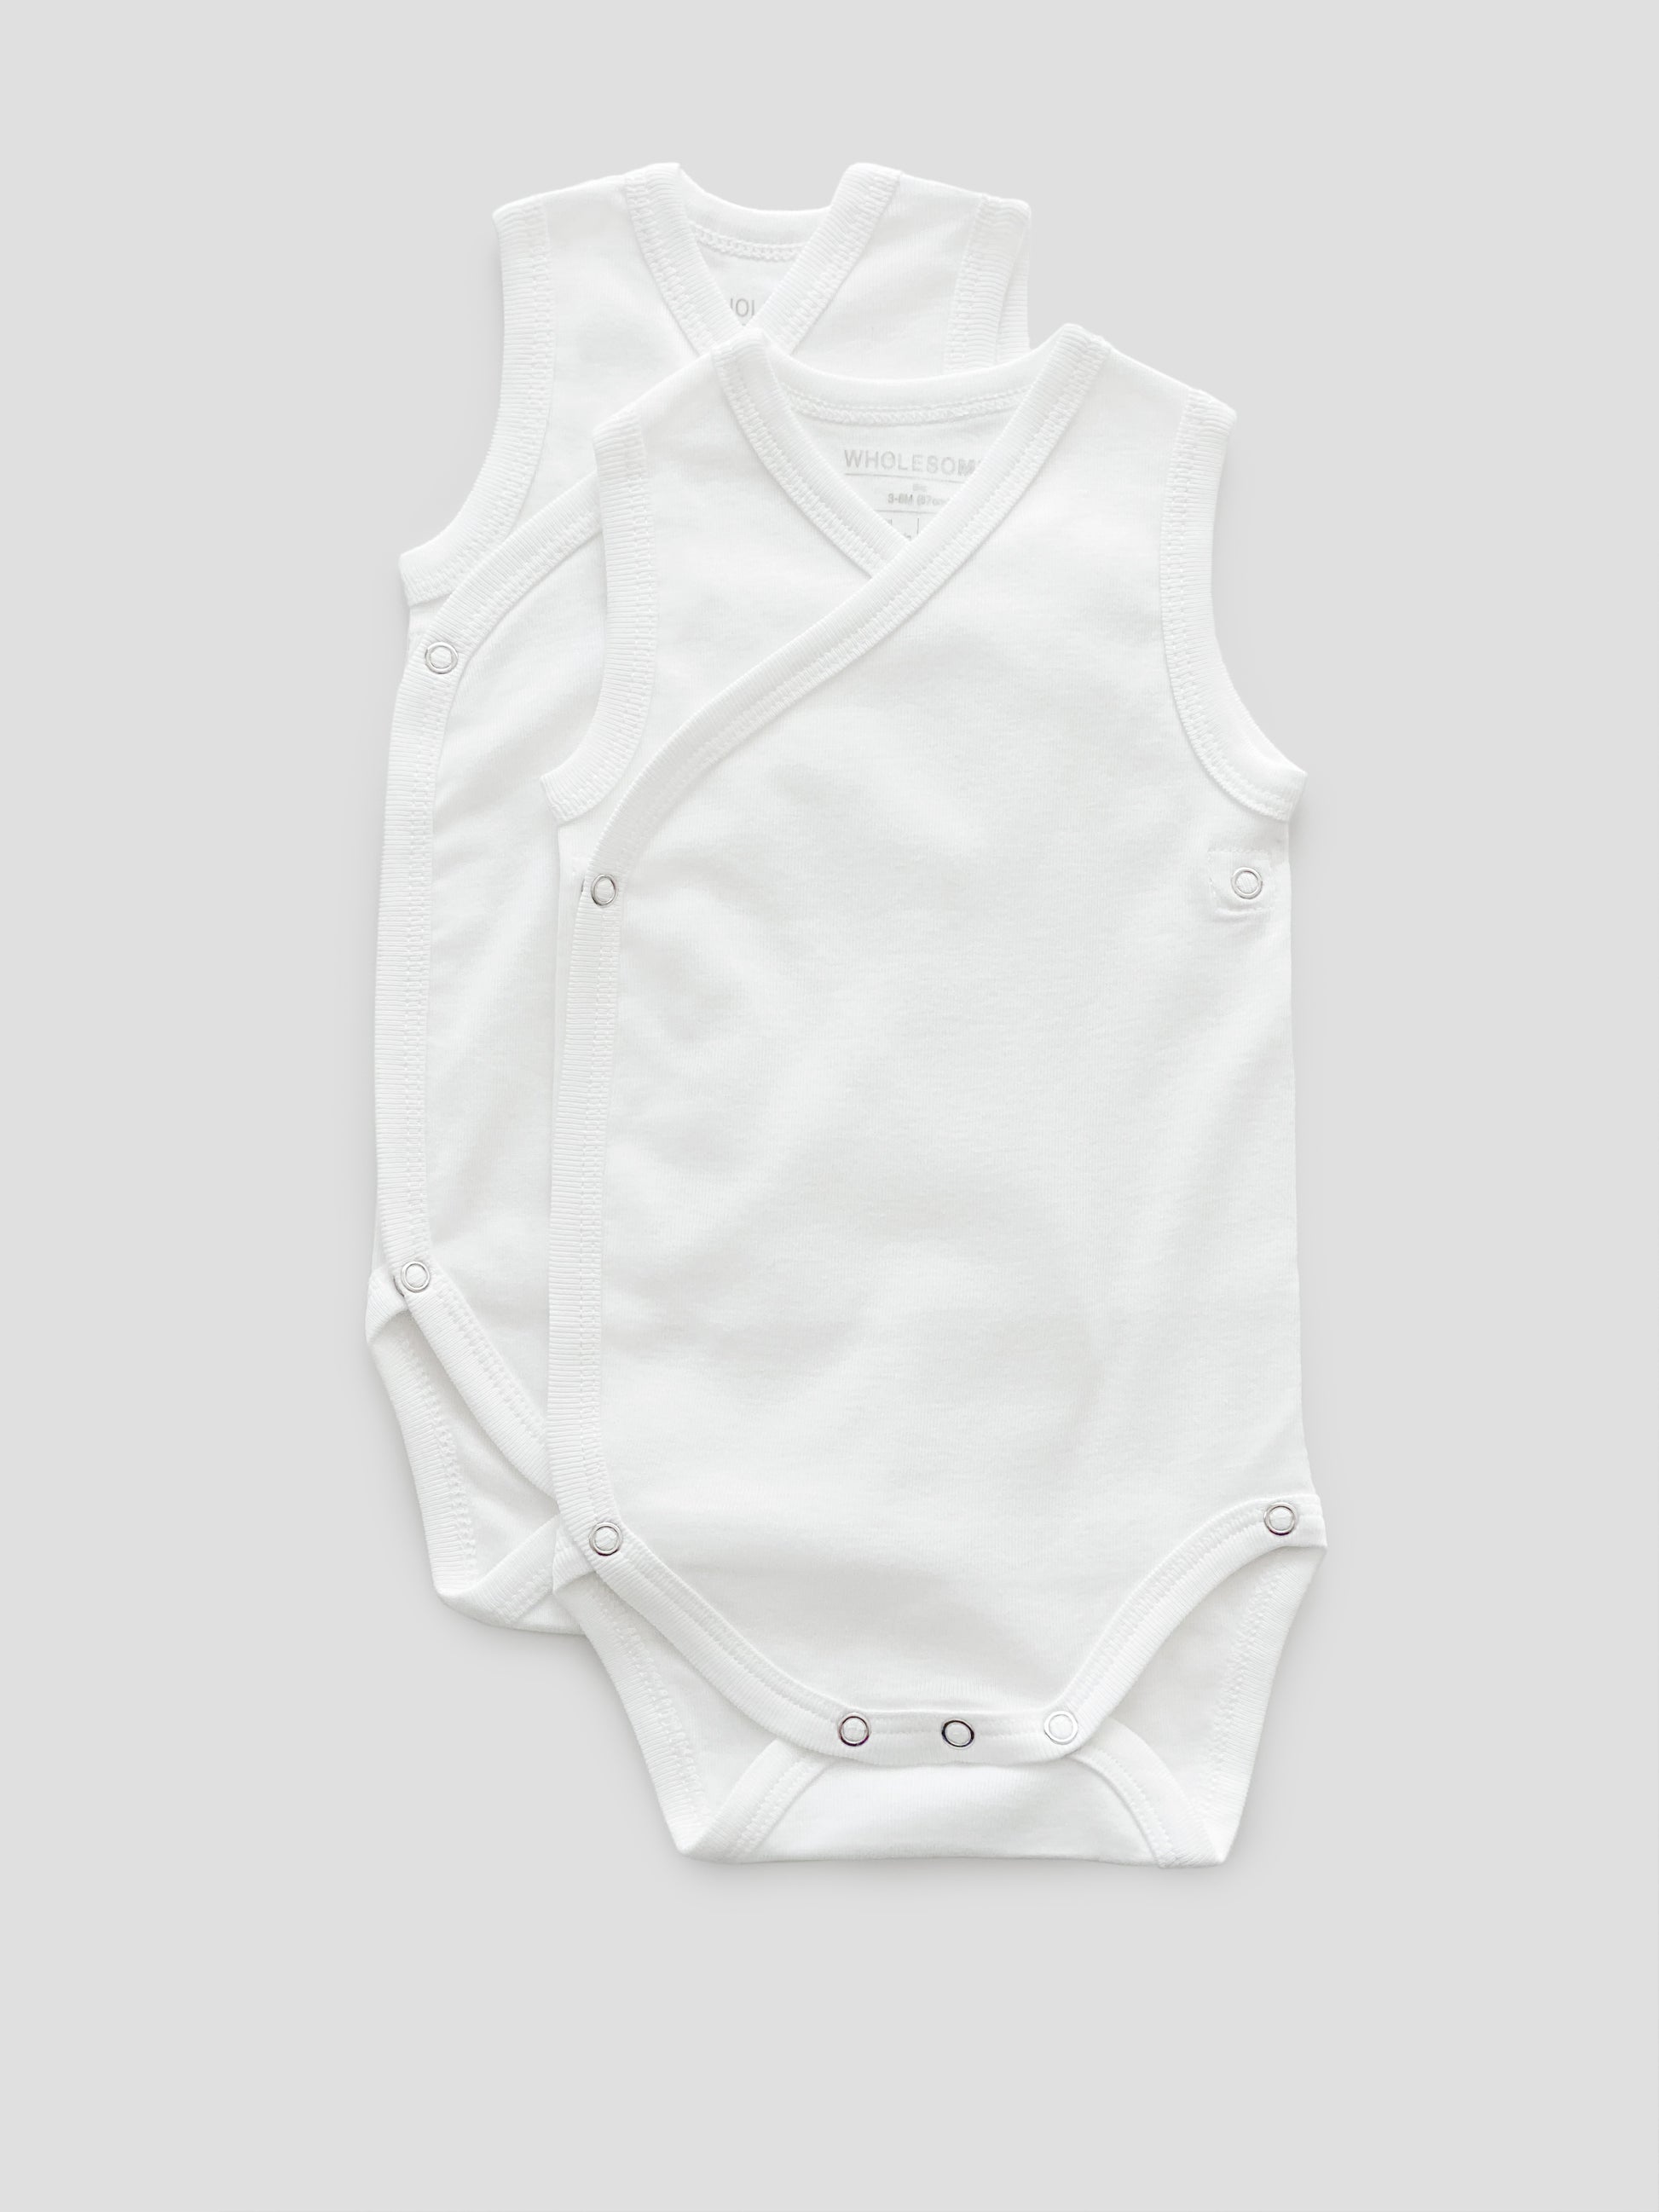 Baby organic rib white cotton bodysuit sleeveless with buttons 2 pack –  Wholesome